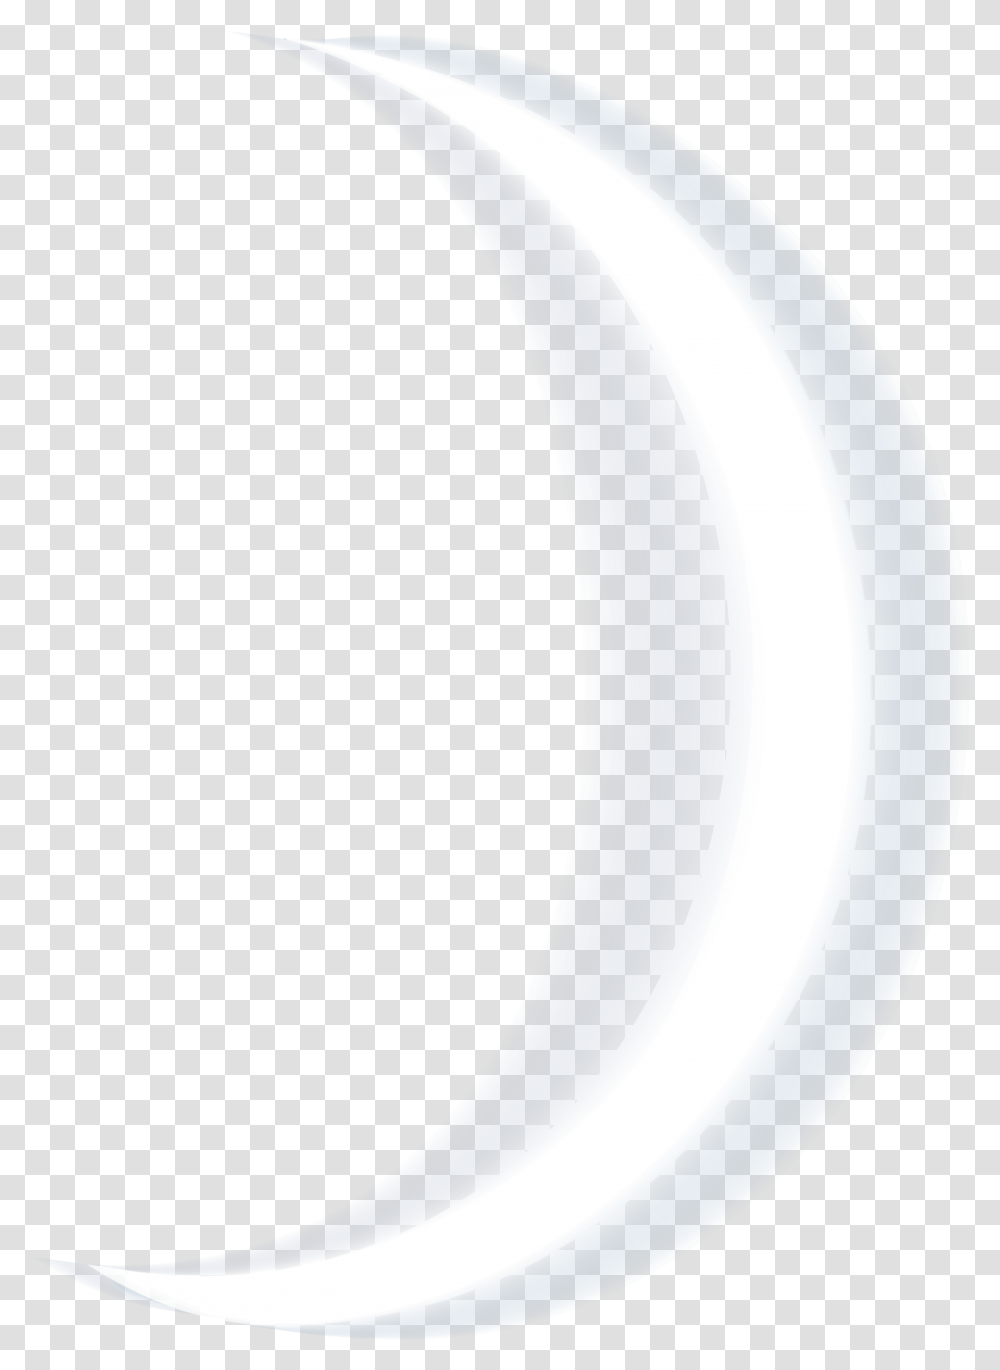 Download Square Angle Black White Circle Hq Image Crescent Real Moon, Plant, Fruit, Food, Outdoors Transparent Png